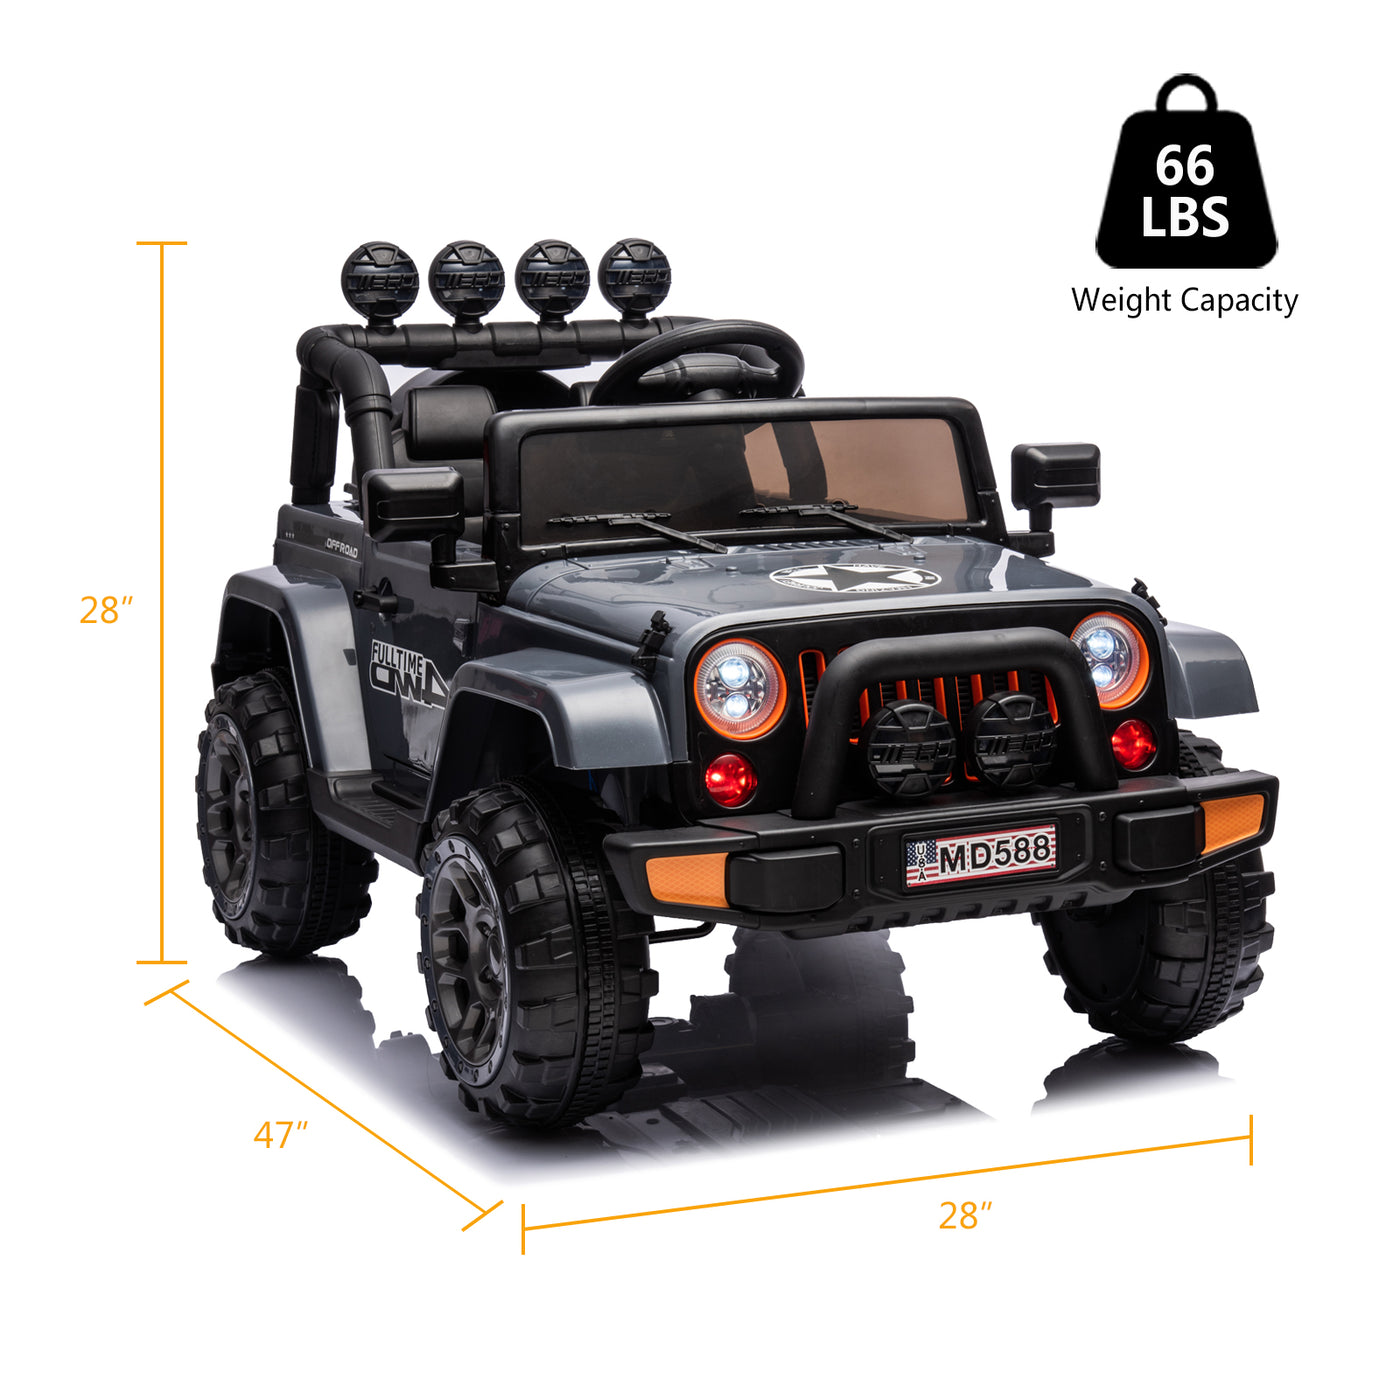 12V Jeep Electric Car Kids Ride On Car with Parent Remote Control, Unicorn DIY Stickers, 2 Motors, LED Light, Openable Door